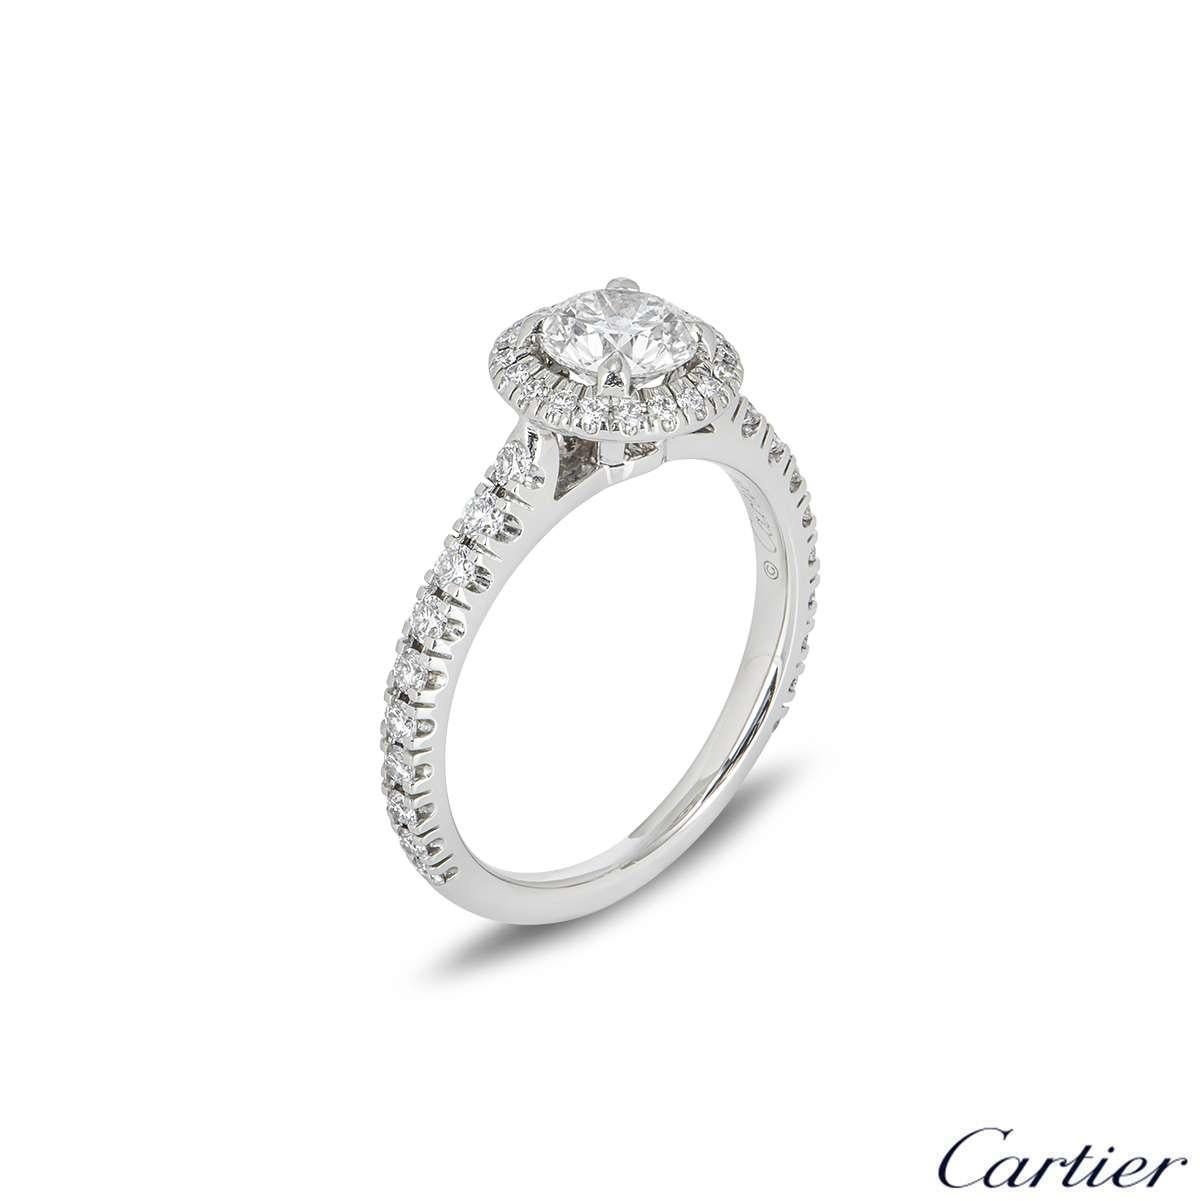 An elegant diamond ring in platinum from the Destinée Solitaire collection by Cartier. The ring is set to the centre with a round brilliant cut diamond weighing 0.70ct, D colour and VVS1 clarity. The diamond scores an excellent rating in all three